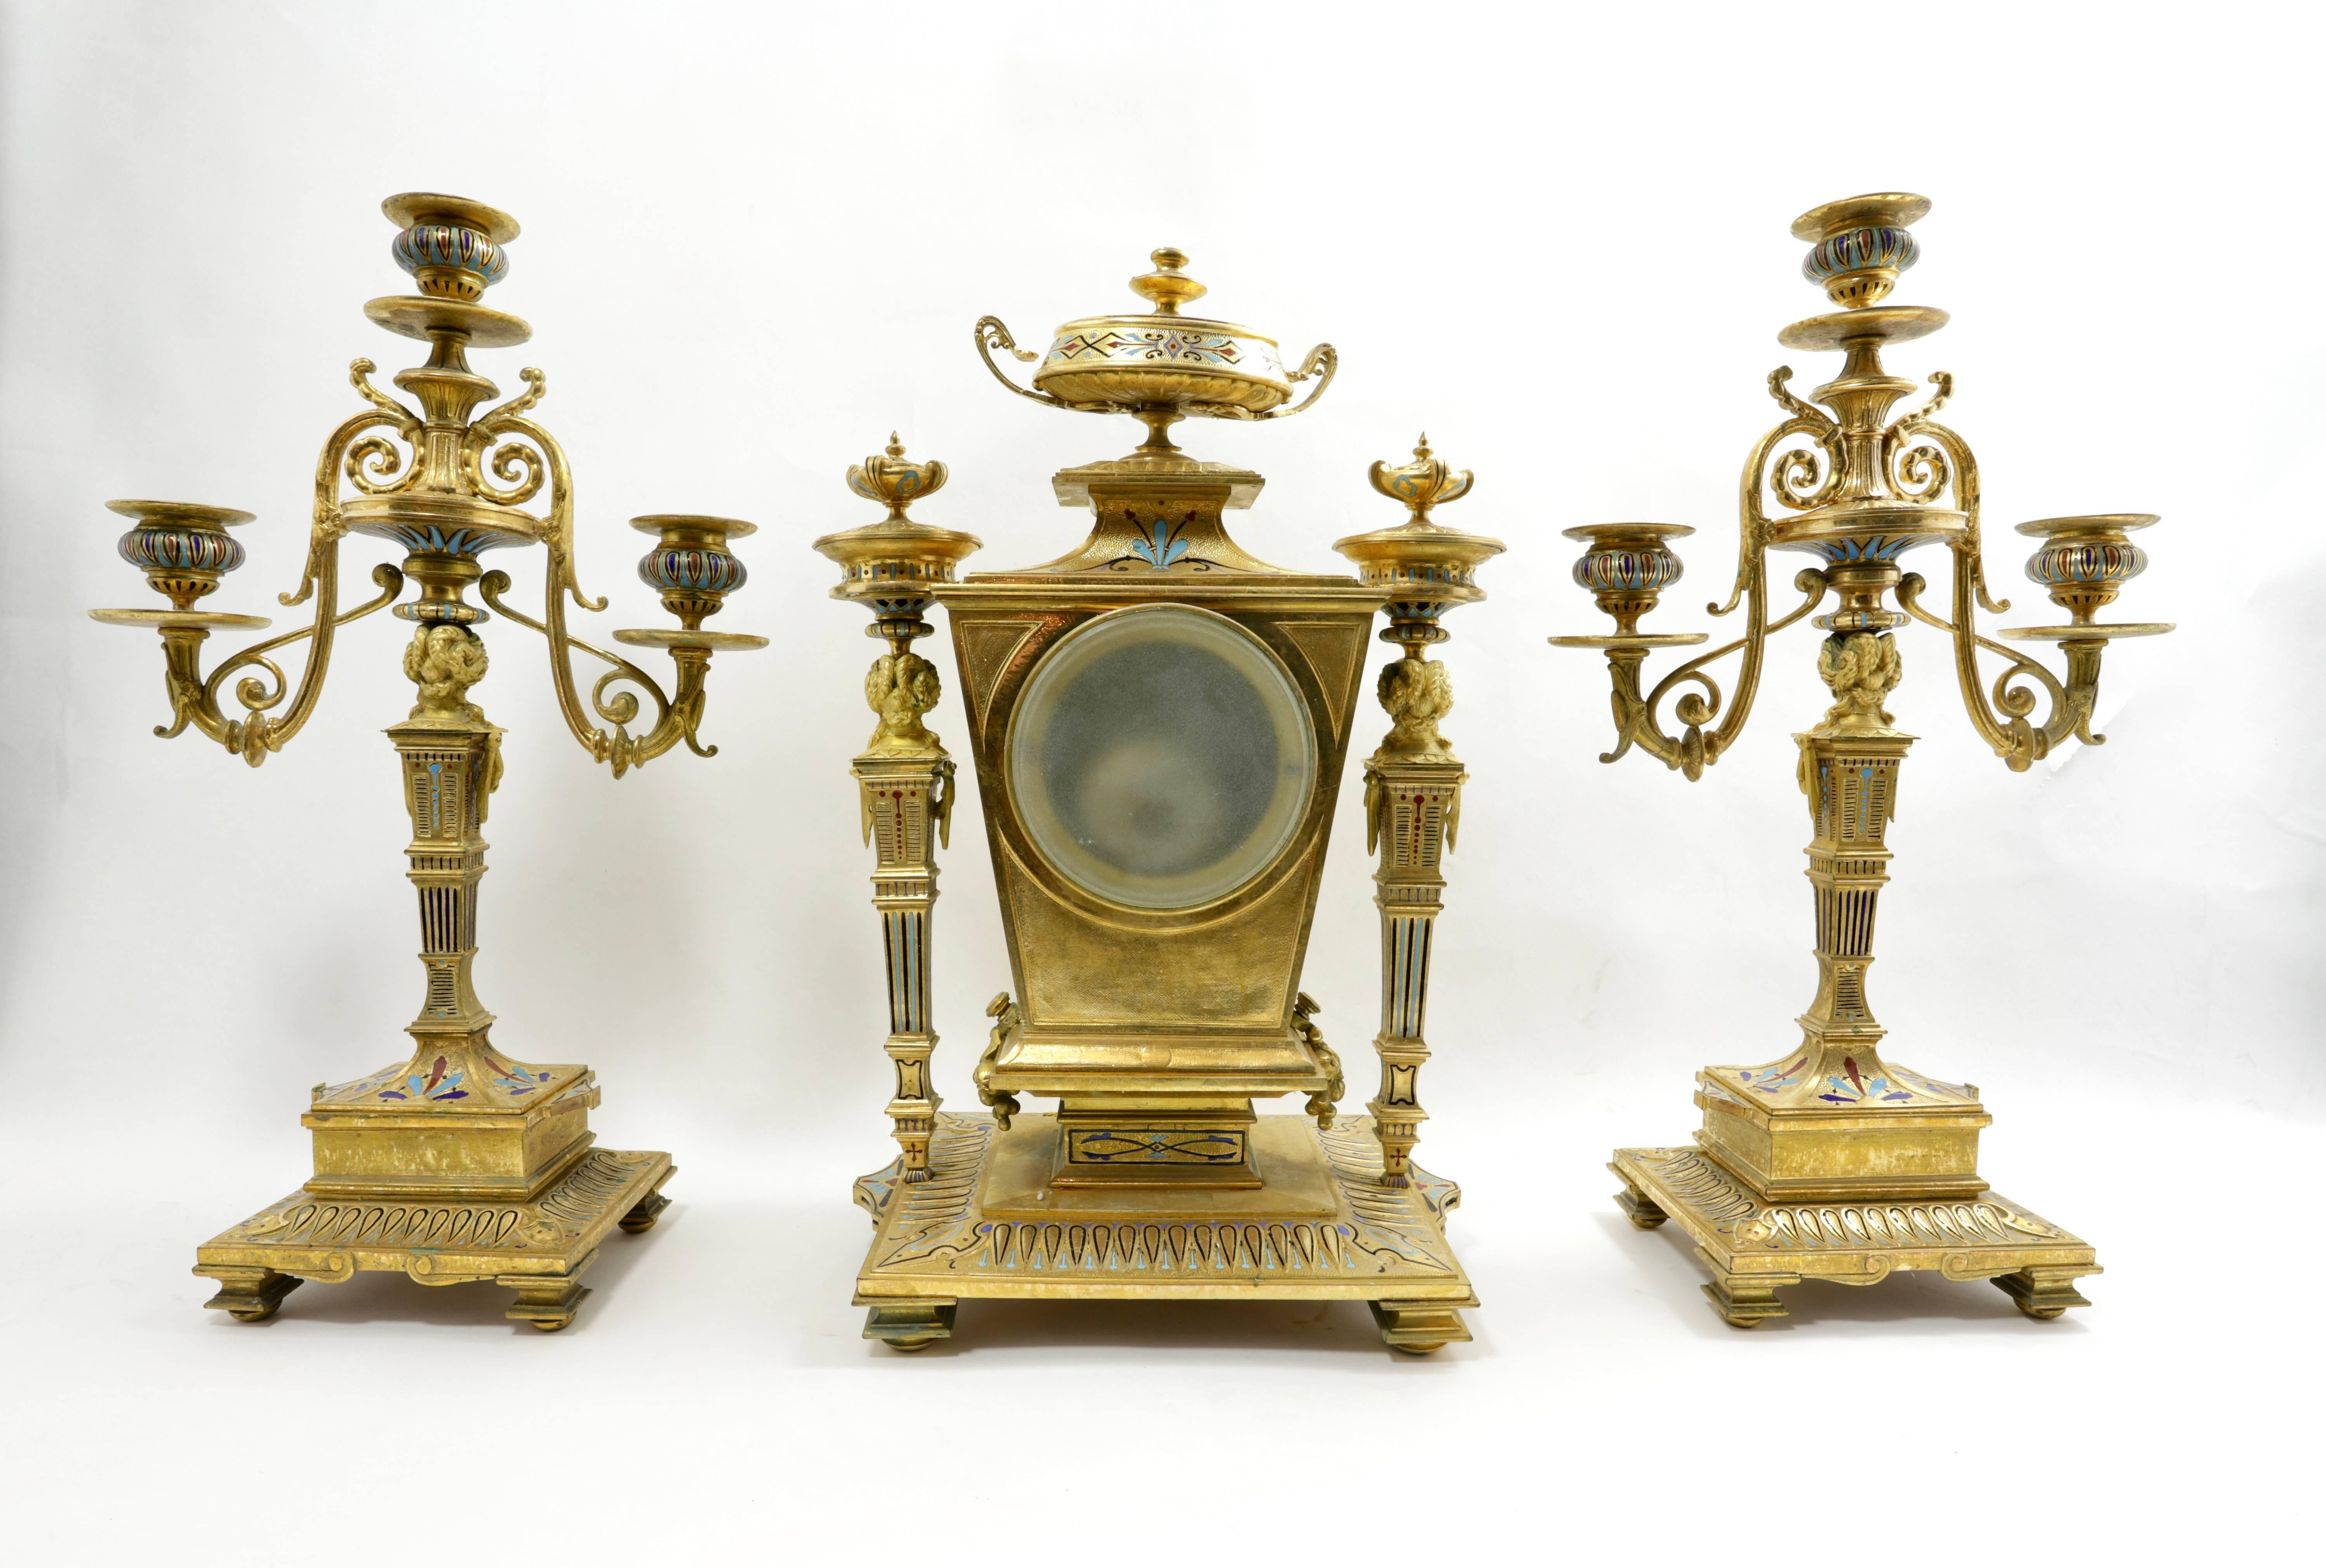 Fine quality French 19th century gilt bronze champlevé enamel three-piece clock set consisting of a clock and a pair of two-arm candelabras.